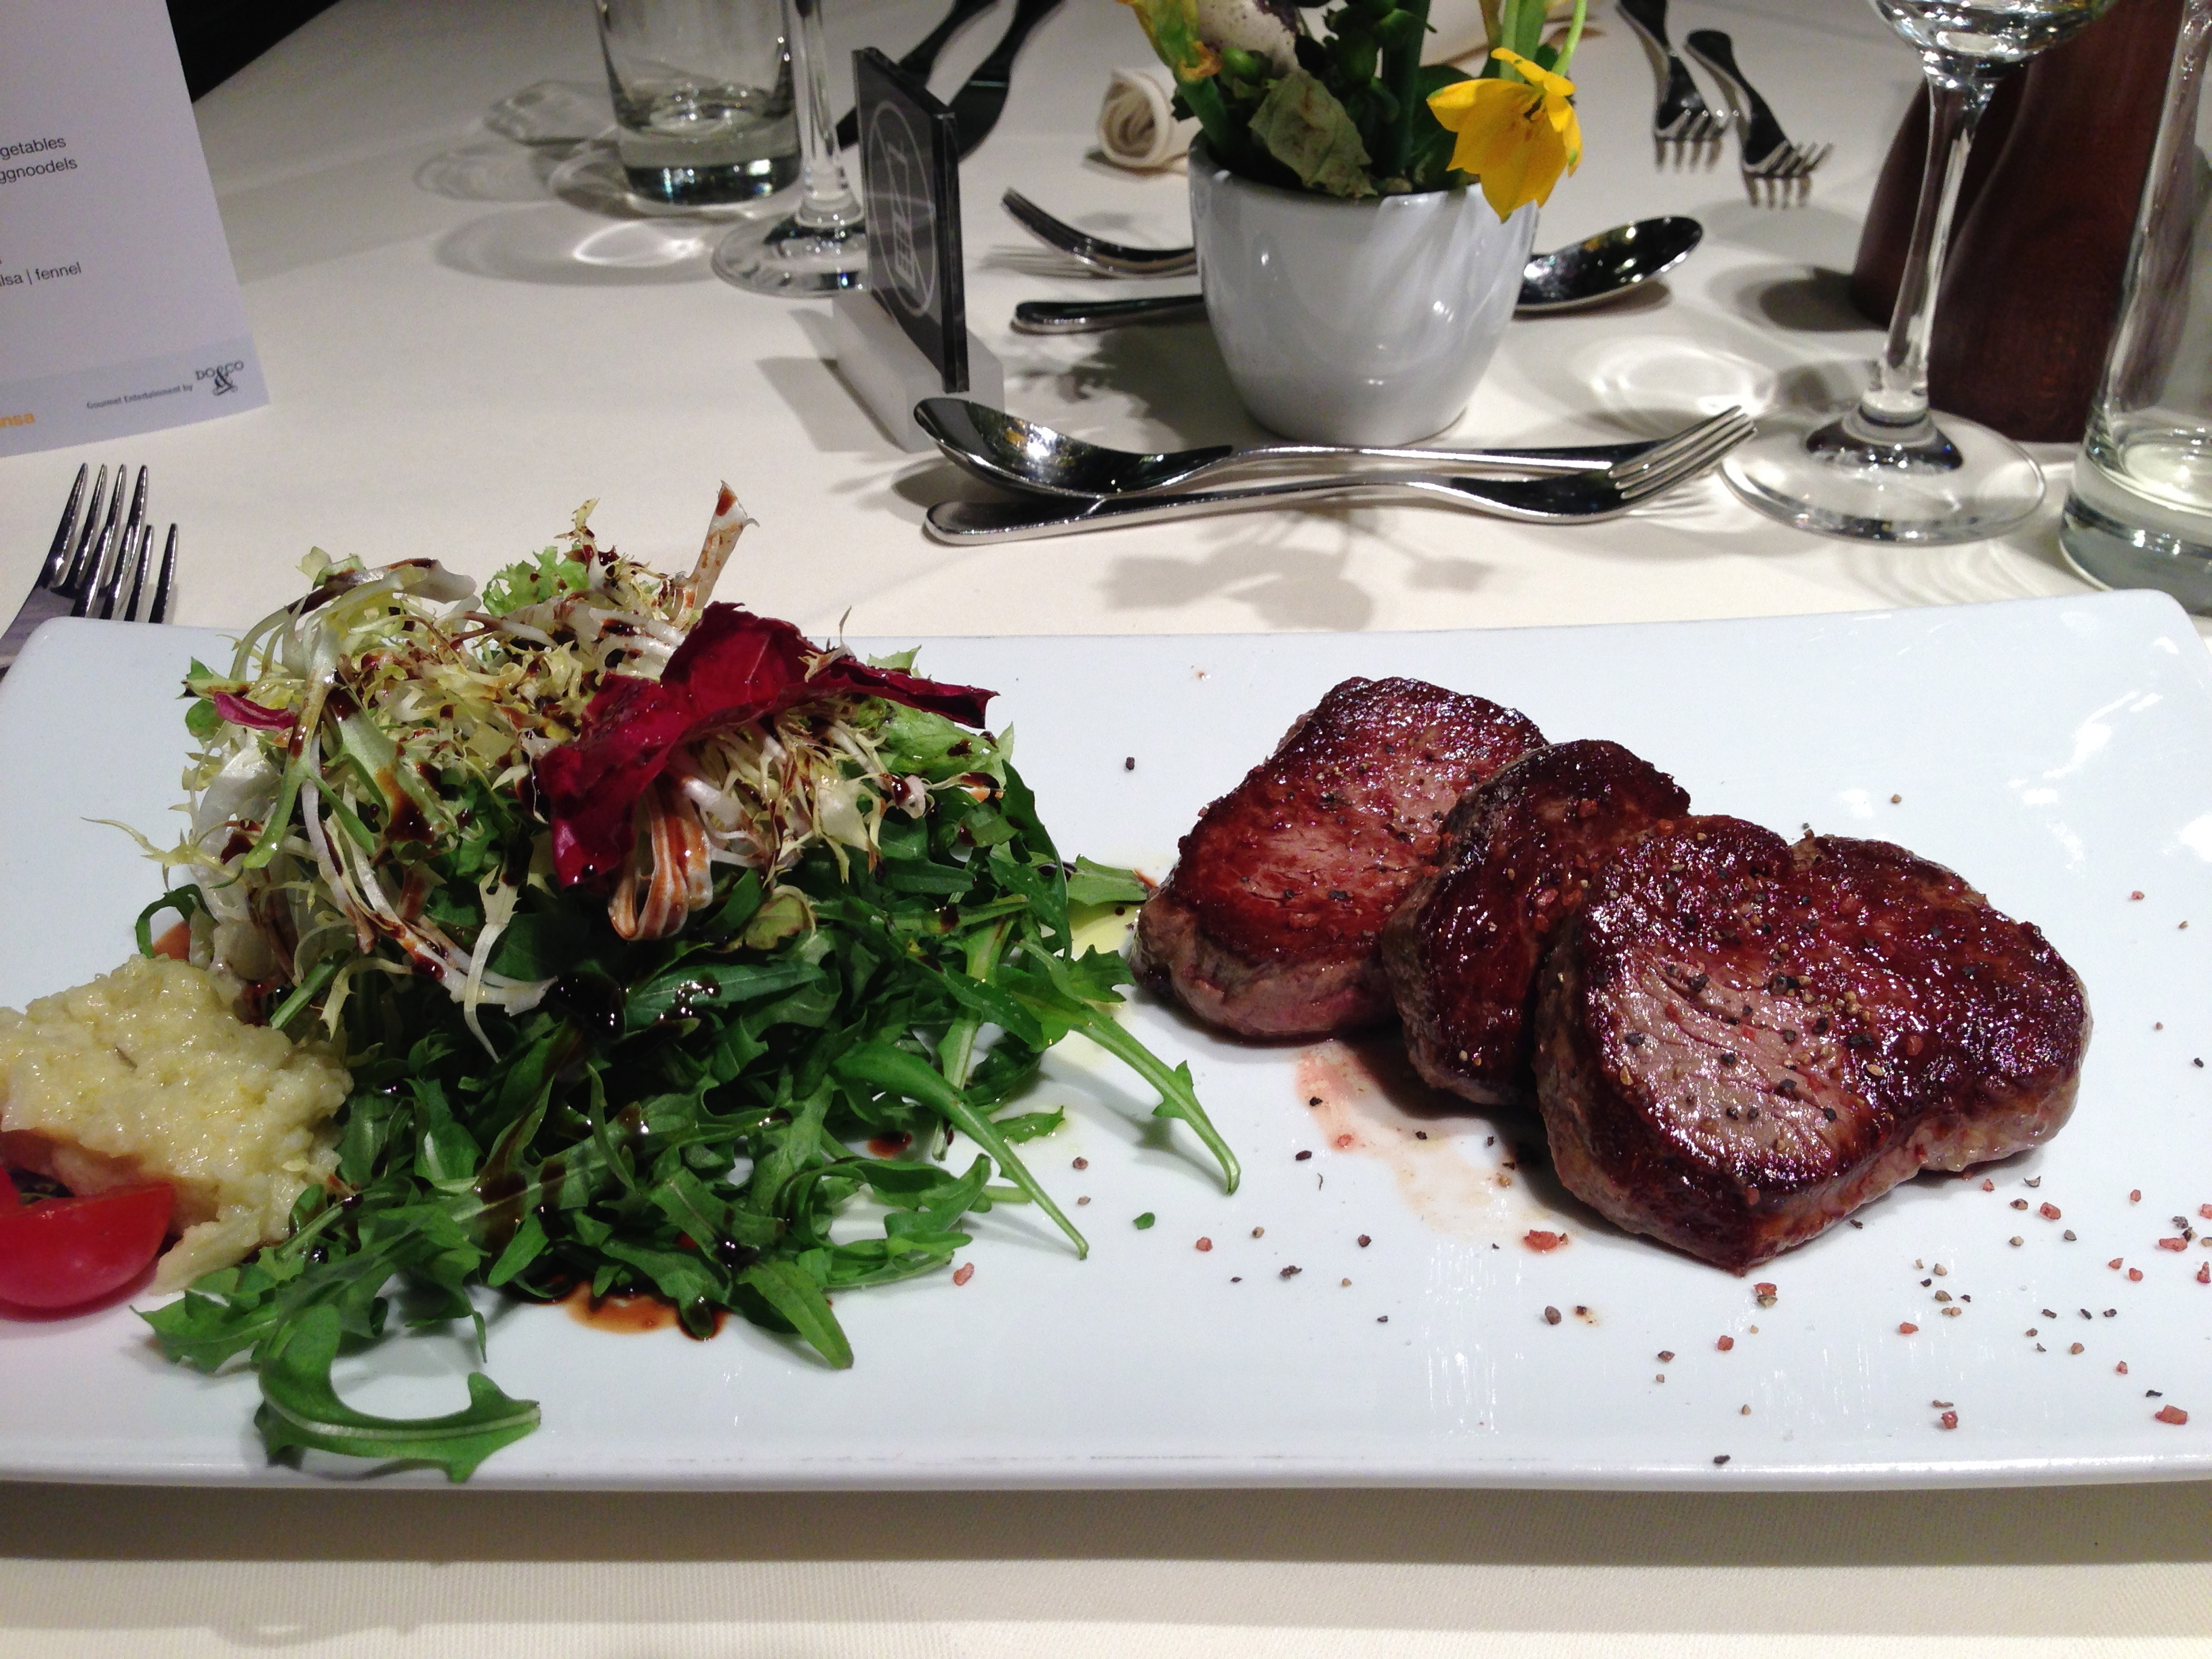 Seared fillet of beef and why the heck would you ruin it with a salad?